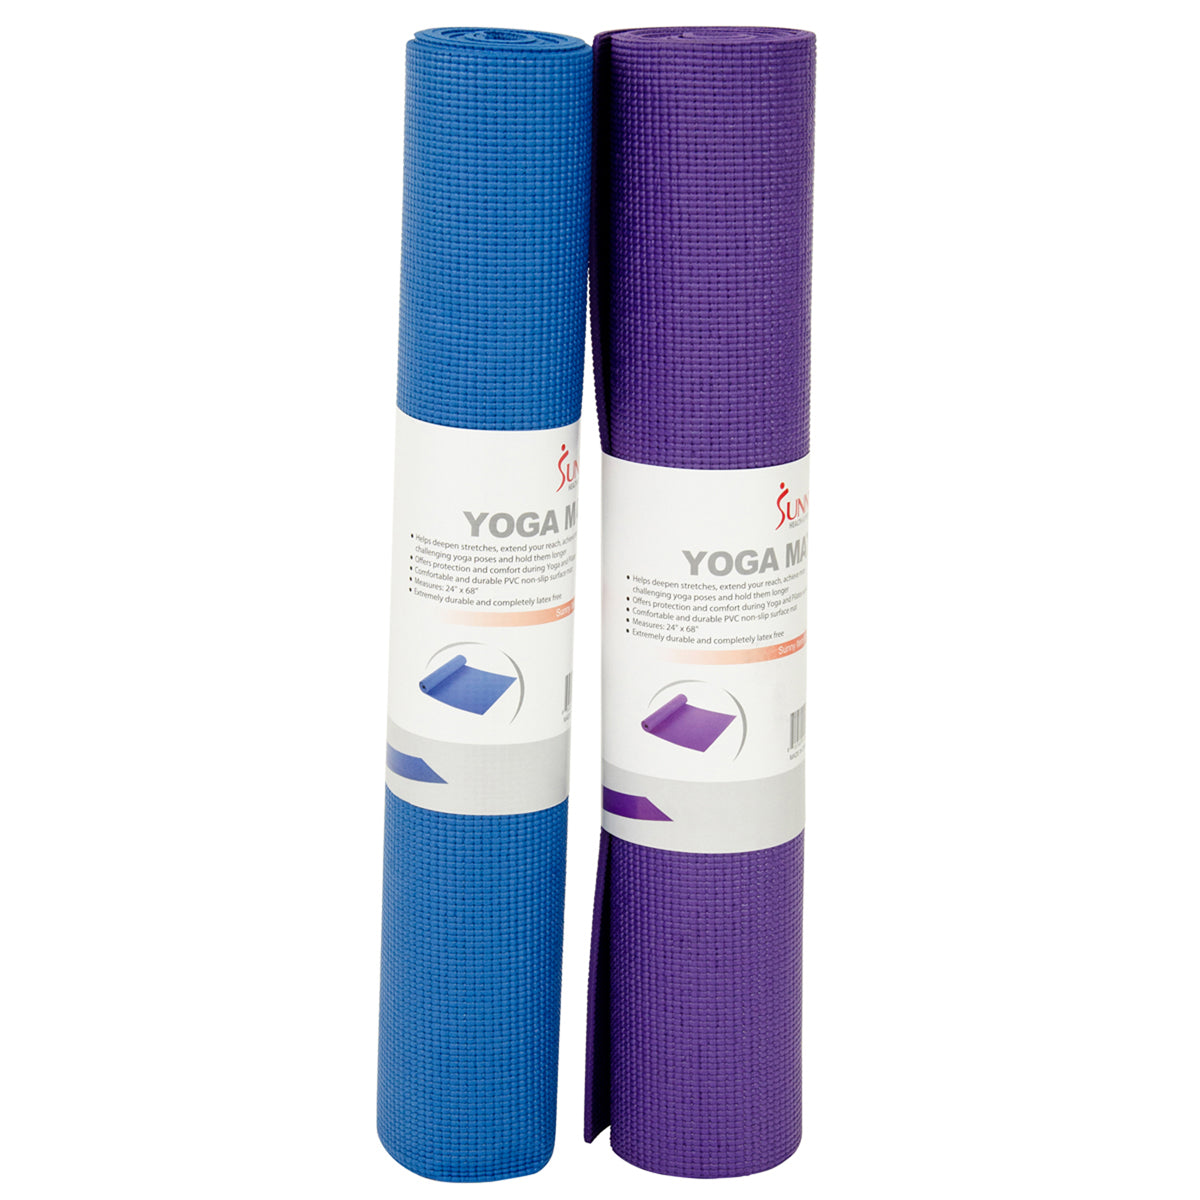 Gaiam Yoga Mat - 6mm Insta-Grip Extra Thick & Dense Textured Non Slip  Exercise Mat for All Types of Yoga & Floor Workouts, 68 L x 24 W x 6mm  Thick